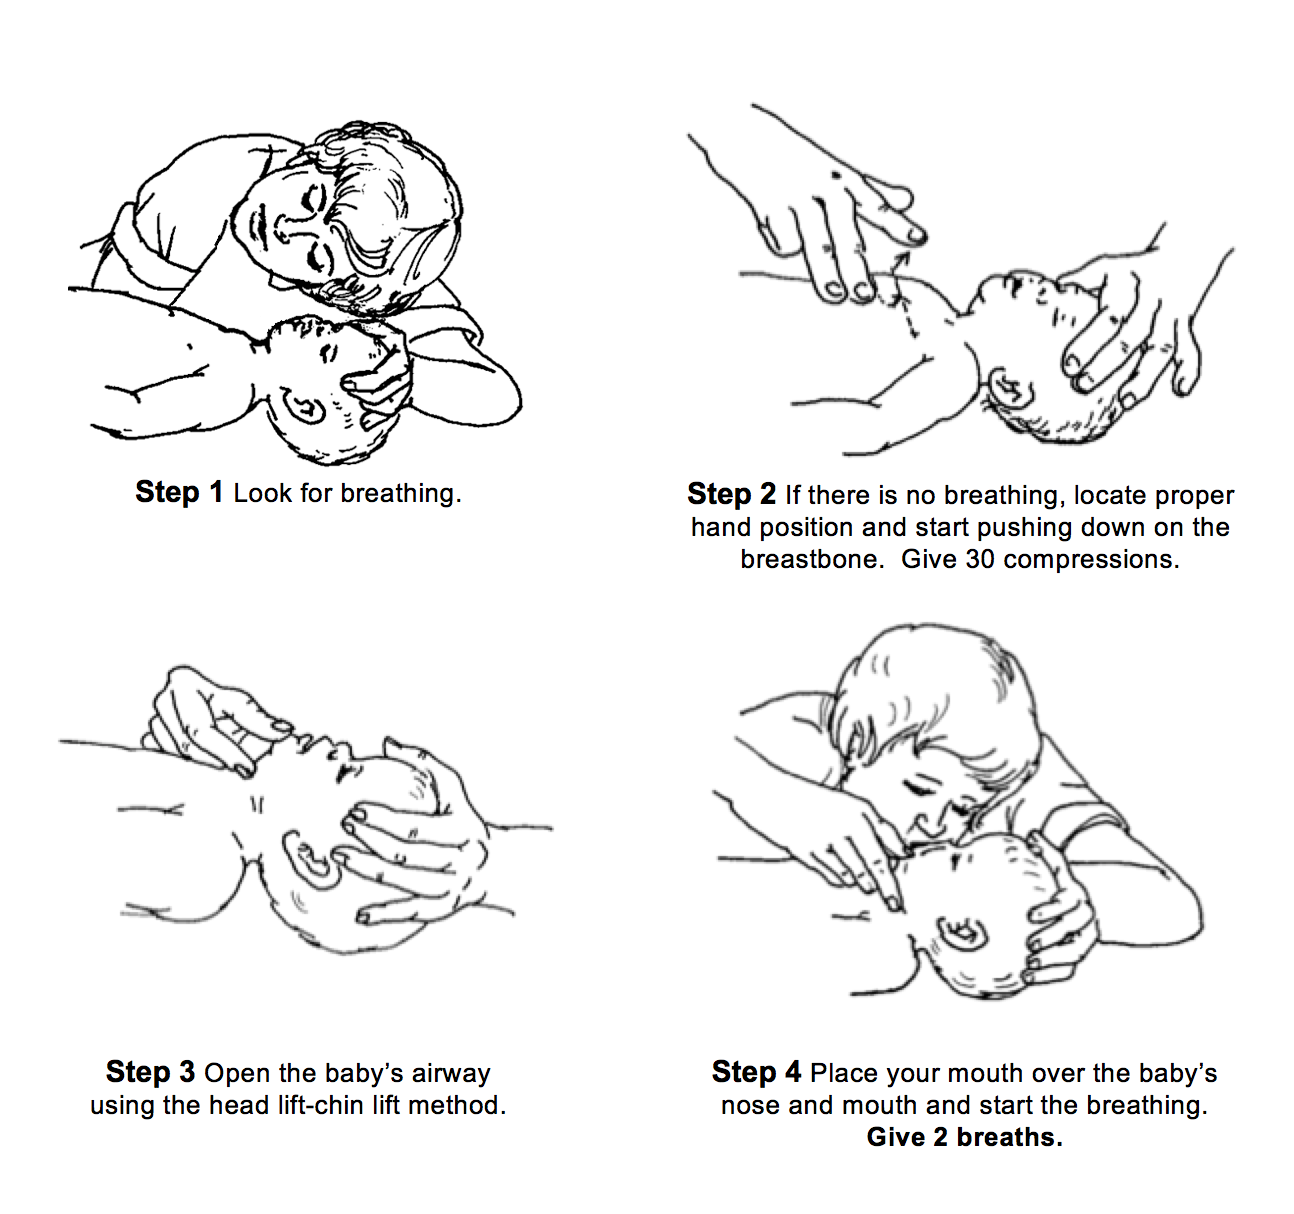 How and When to Perform CPR